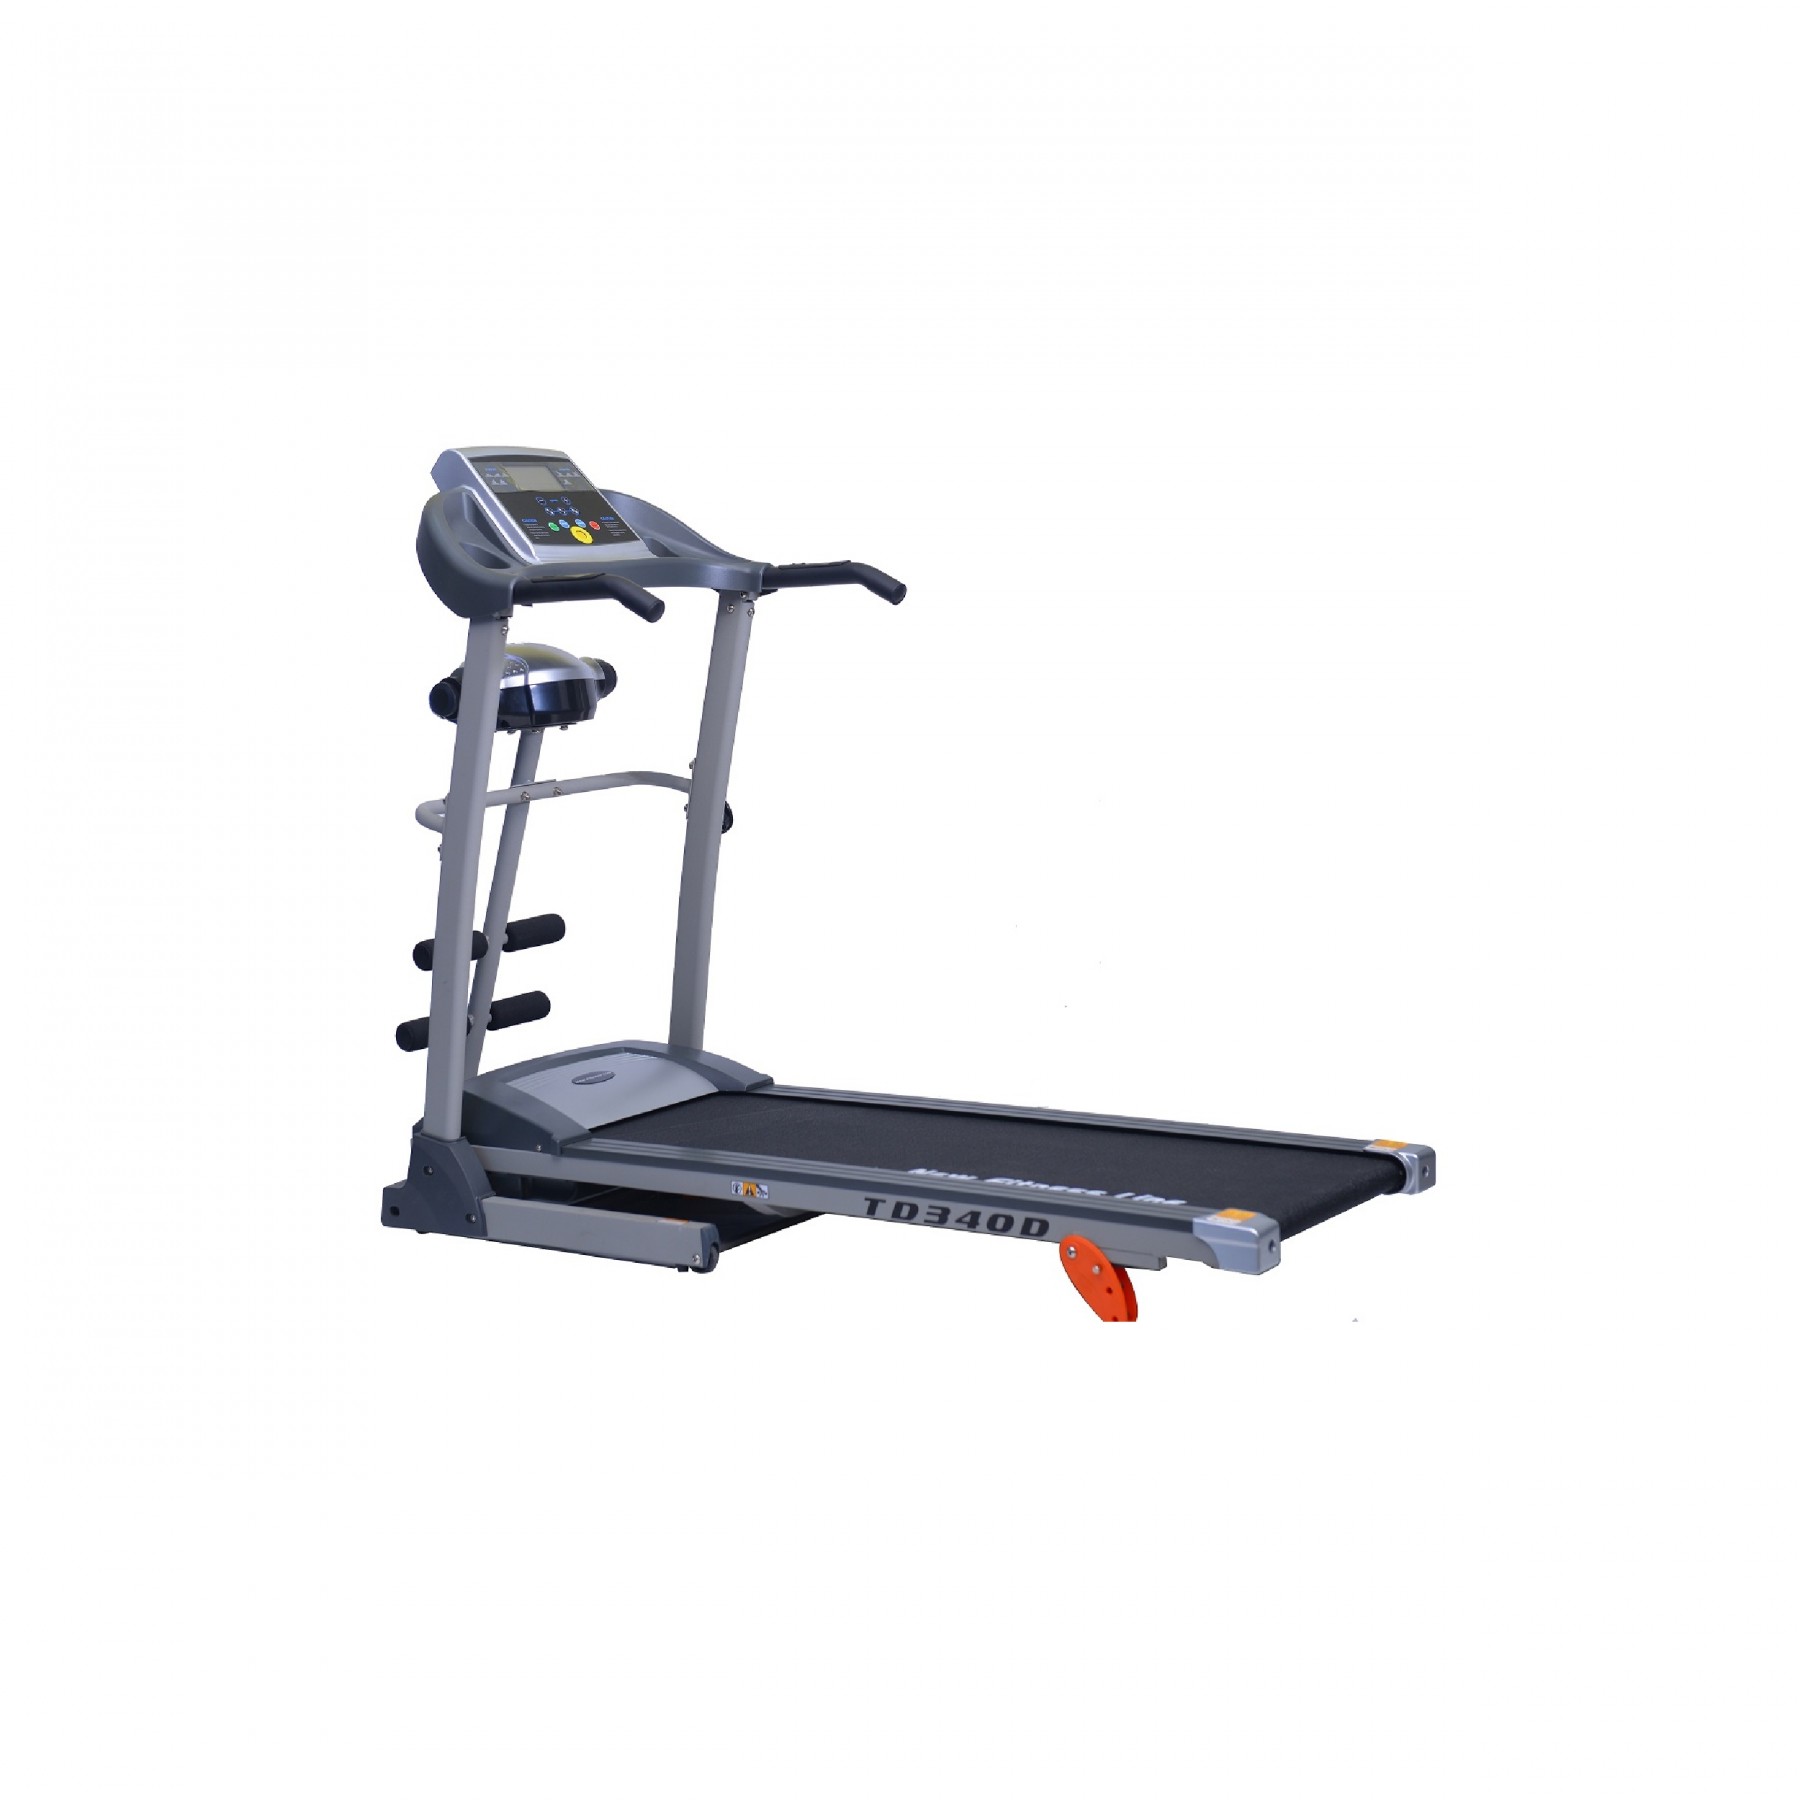 NEW FITNESS LINE TREADMILL 2HP 3 IN 1 120KG USER WEIGHT TD340D